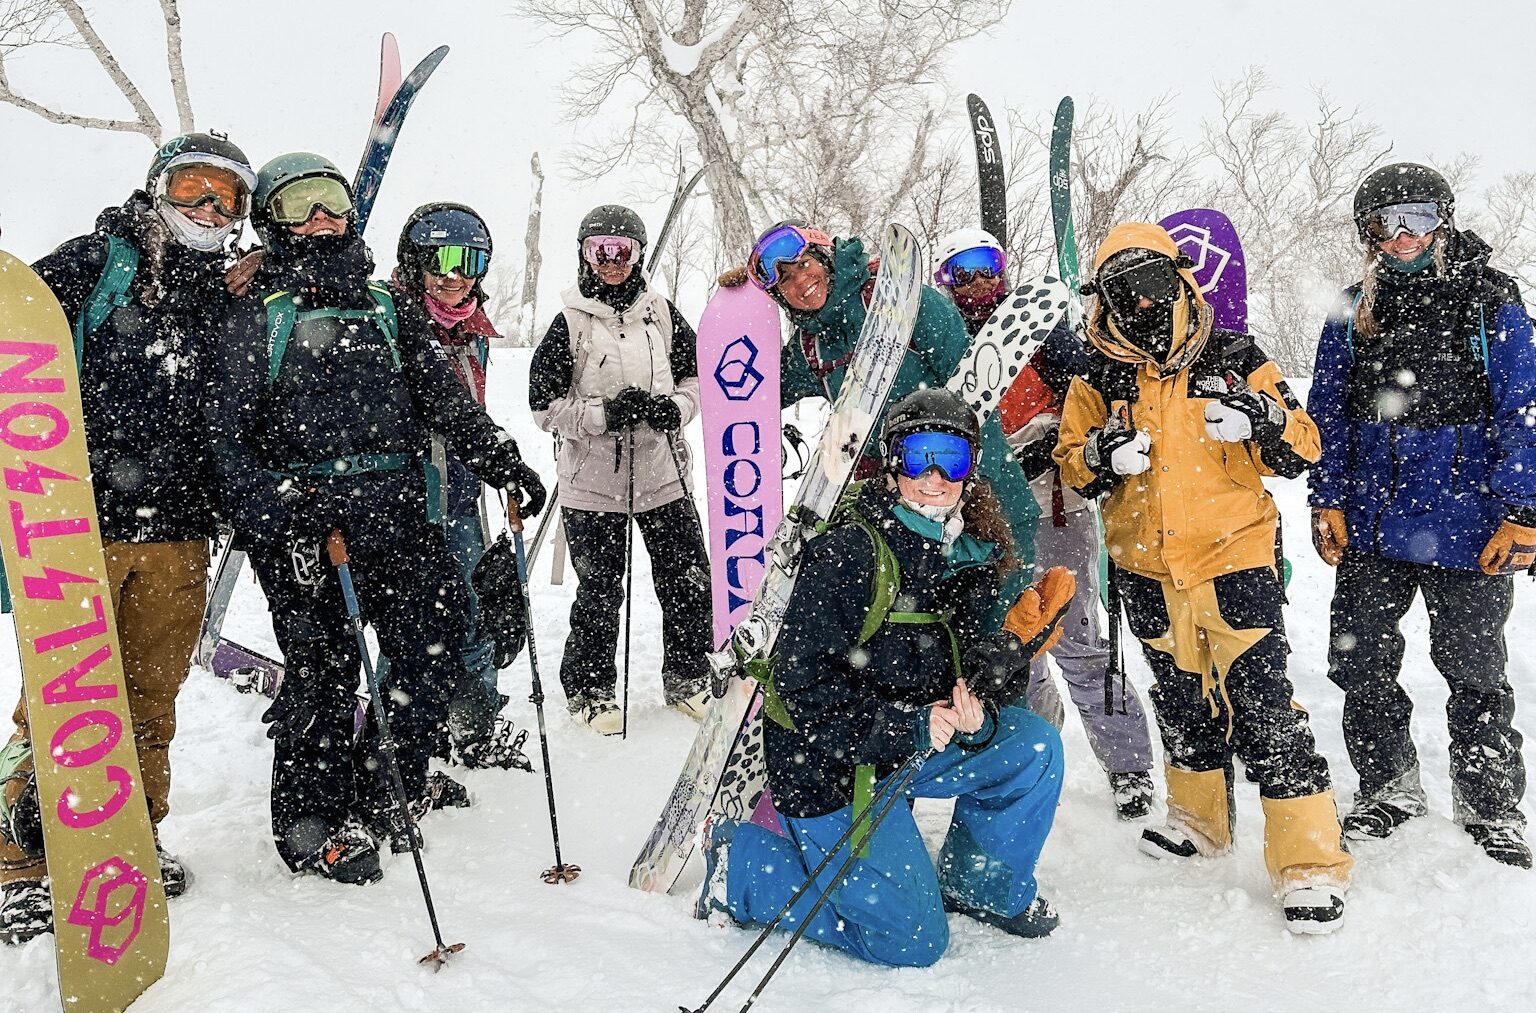 Coalition Snow’s Far Out trip this year in Hokkaido, Japan